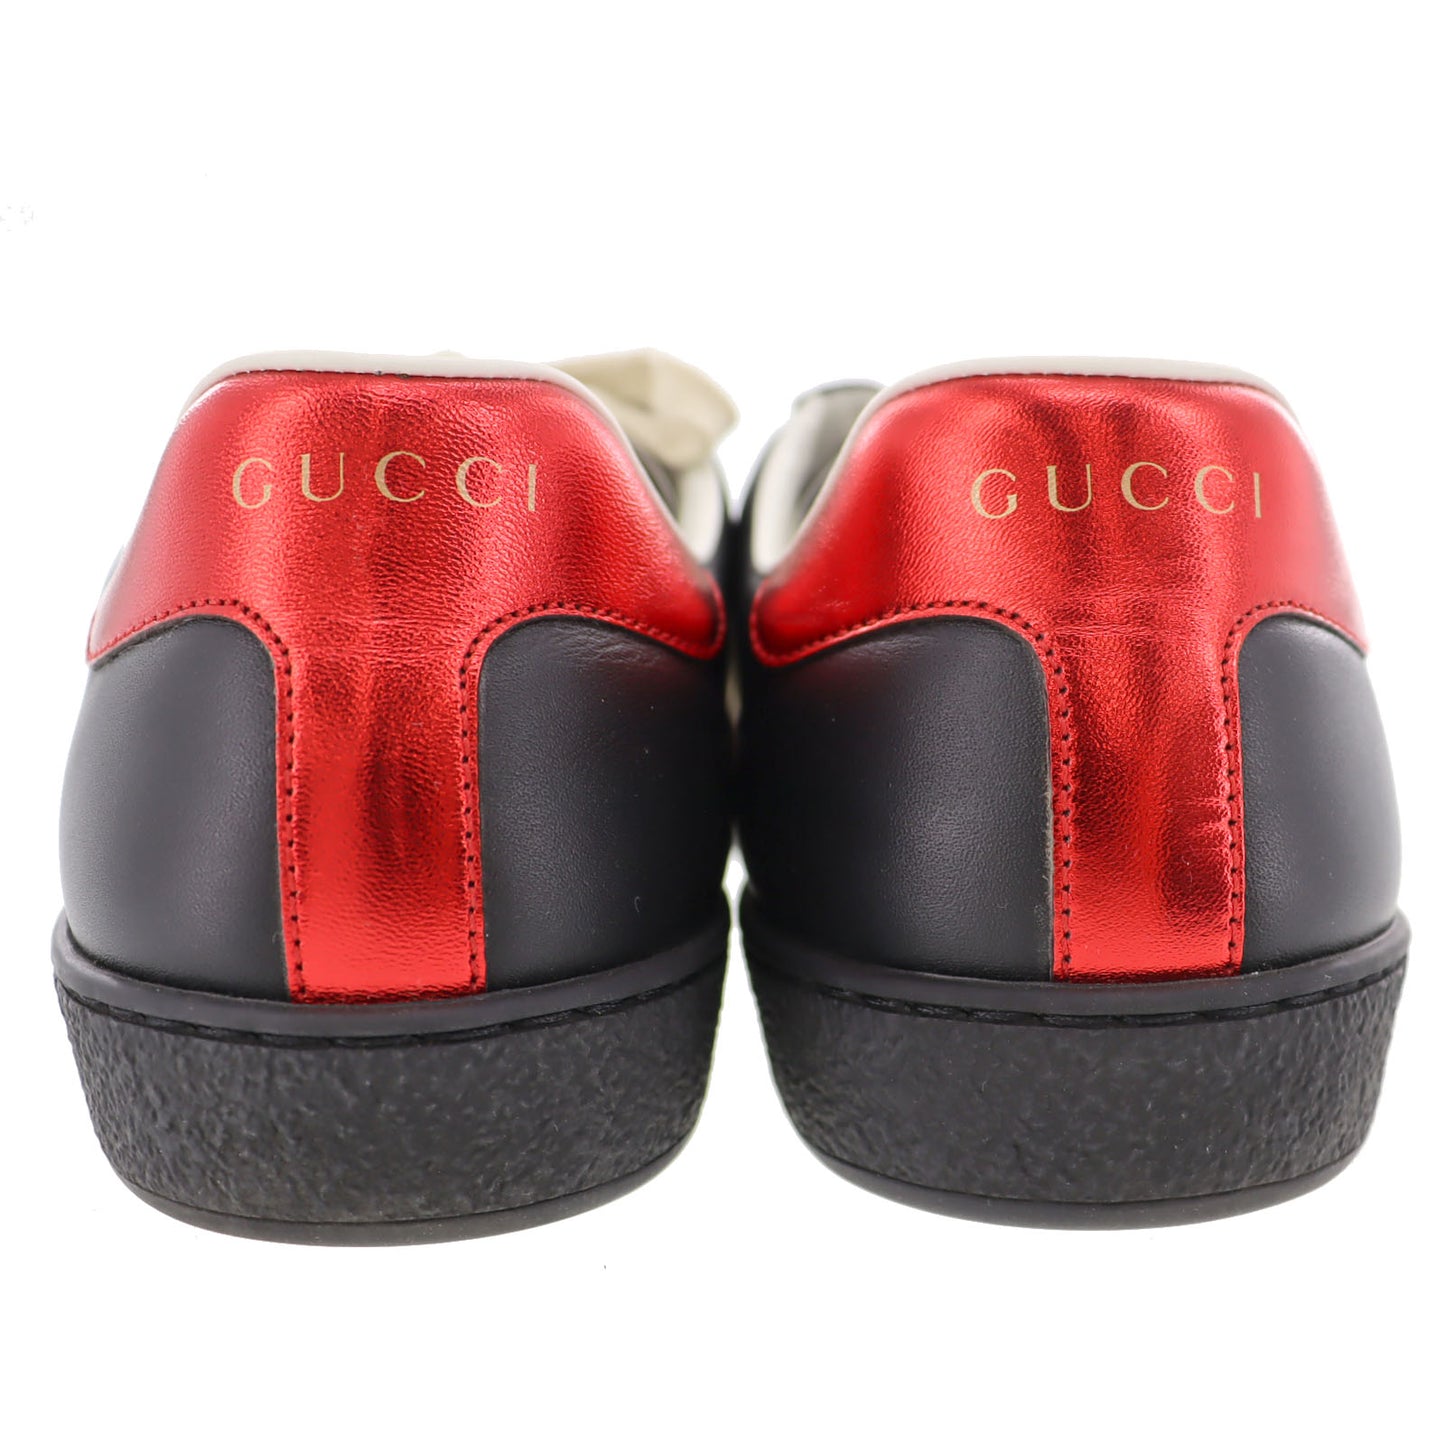 GUCCI Lace Up Shoes Sneakers Black Red Beige Leather Rubber #AG261